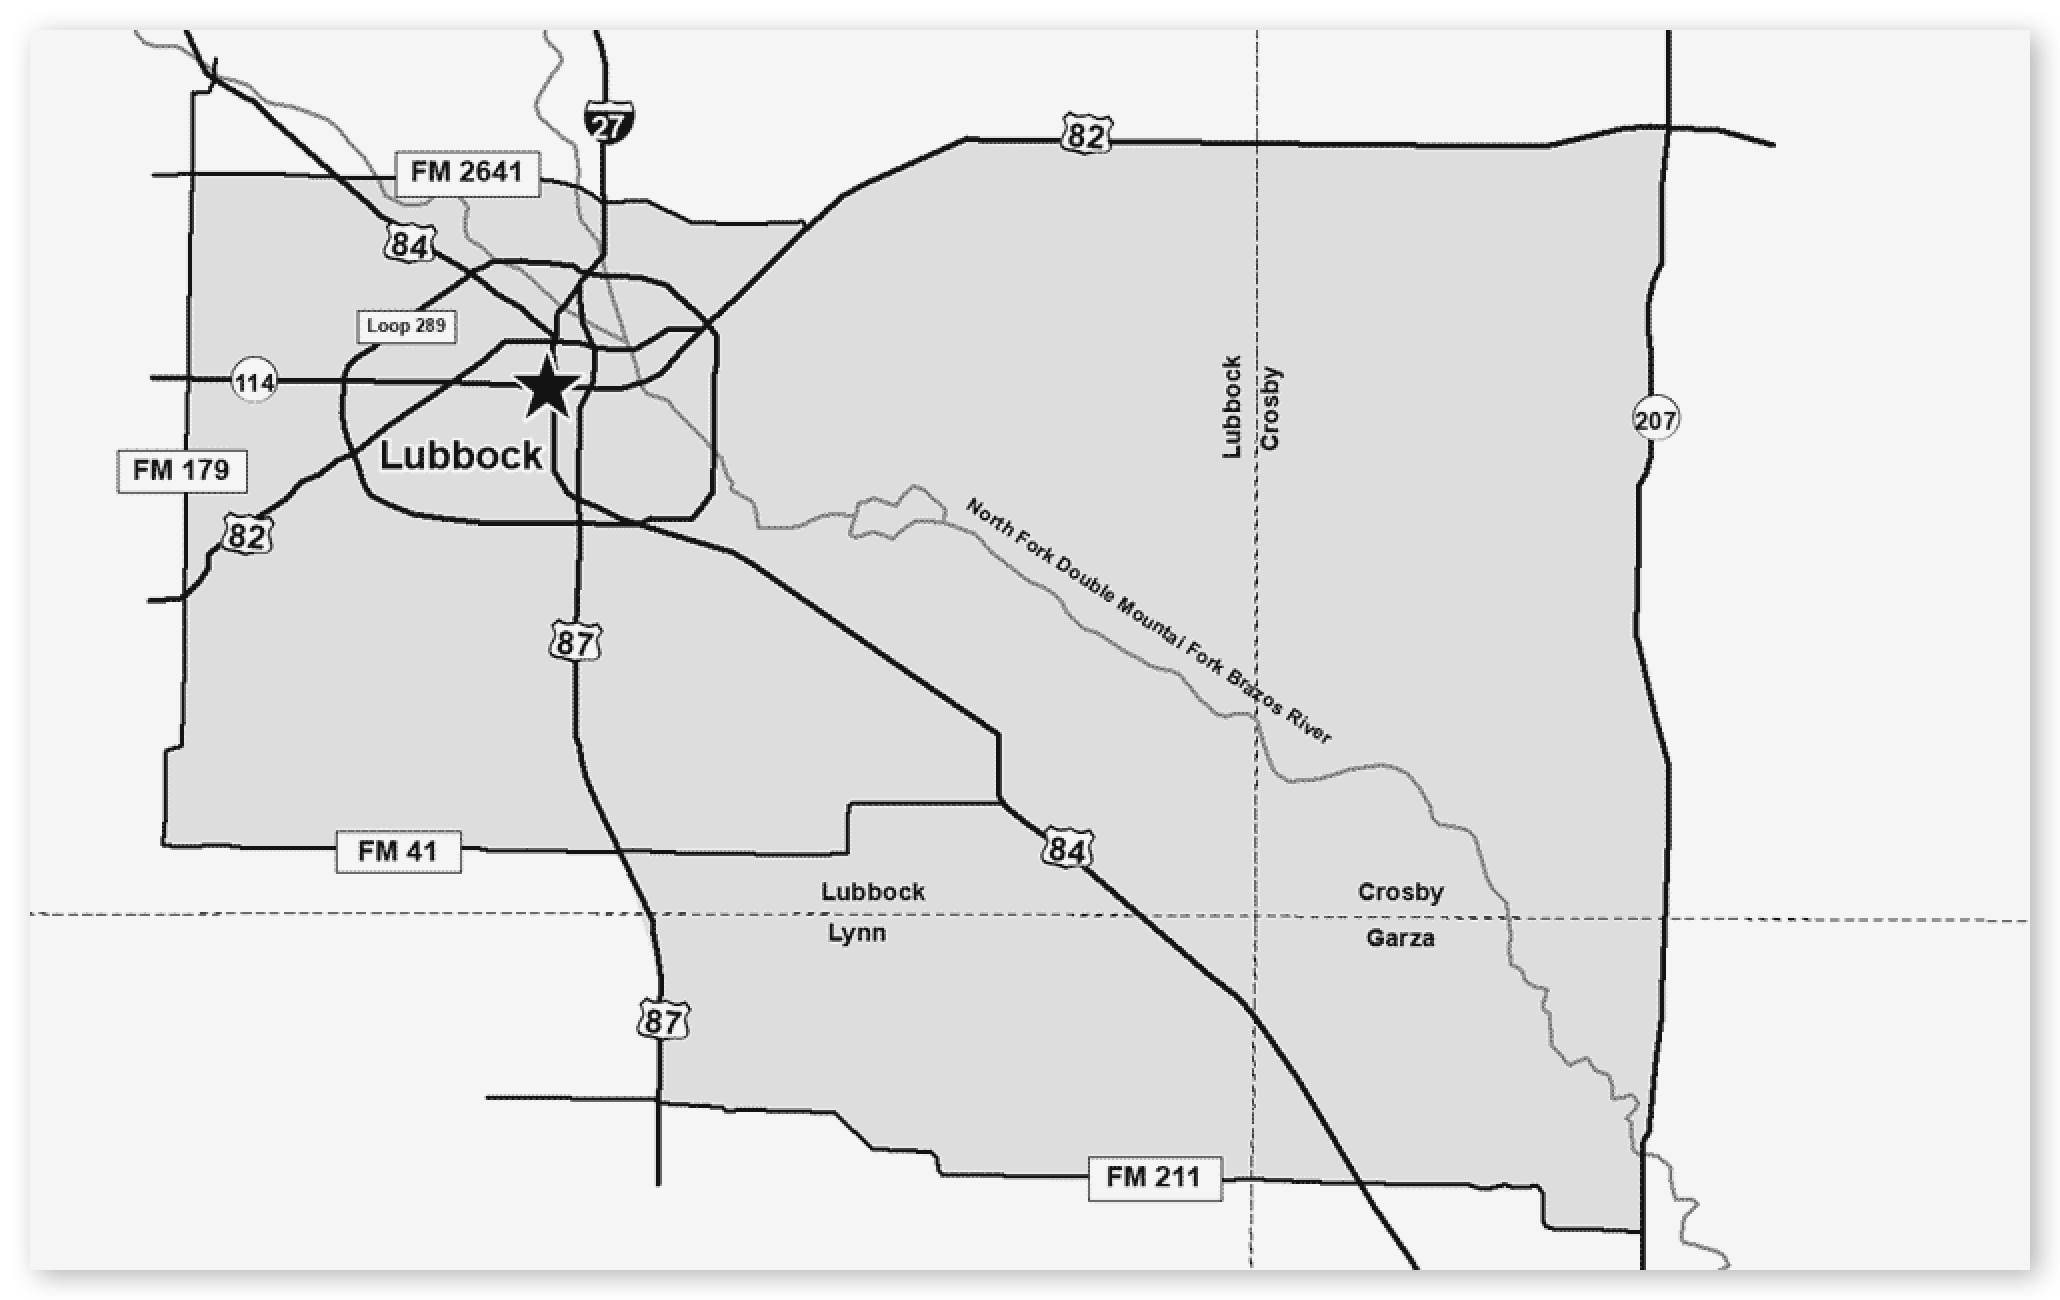 Mandatory CWD Sampling and Carcass Movement Restriction Zone in Lubbock County